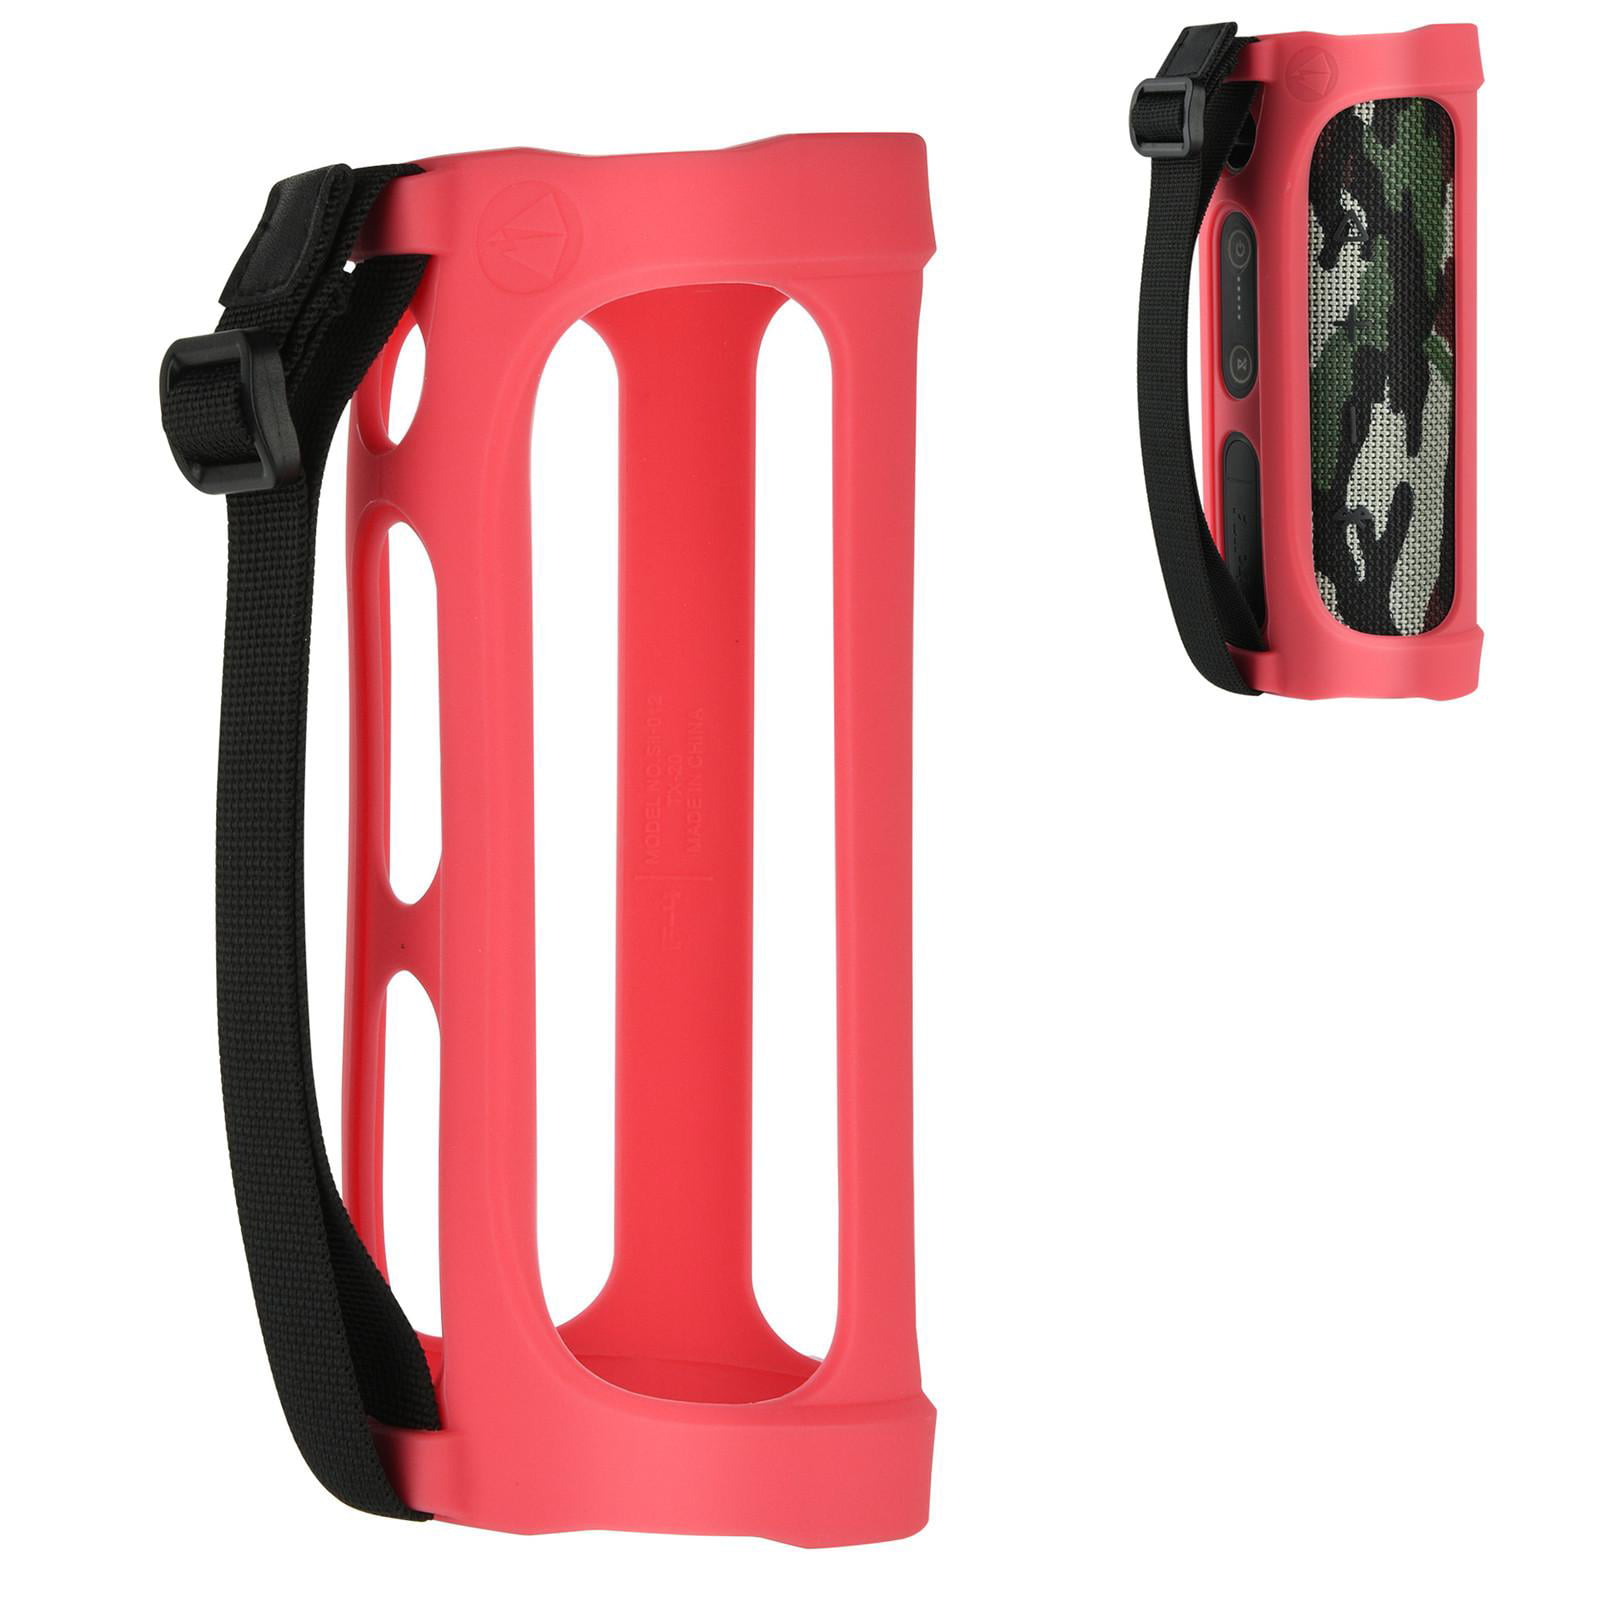 For Jbl FLIP 4 BT Speaker Portable Mountaineering Silicone Case Cover Protecter 